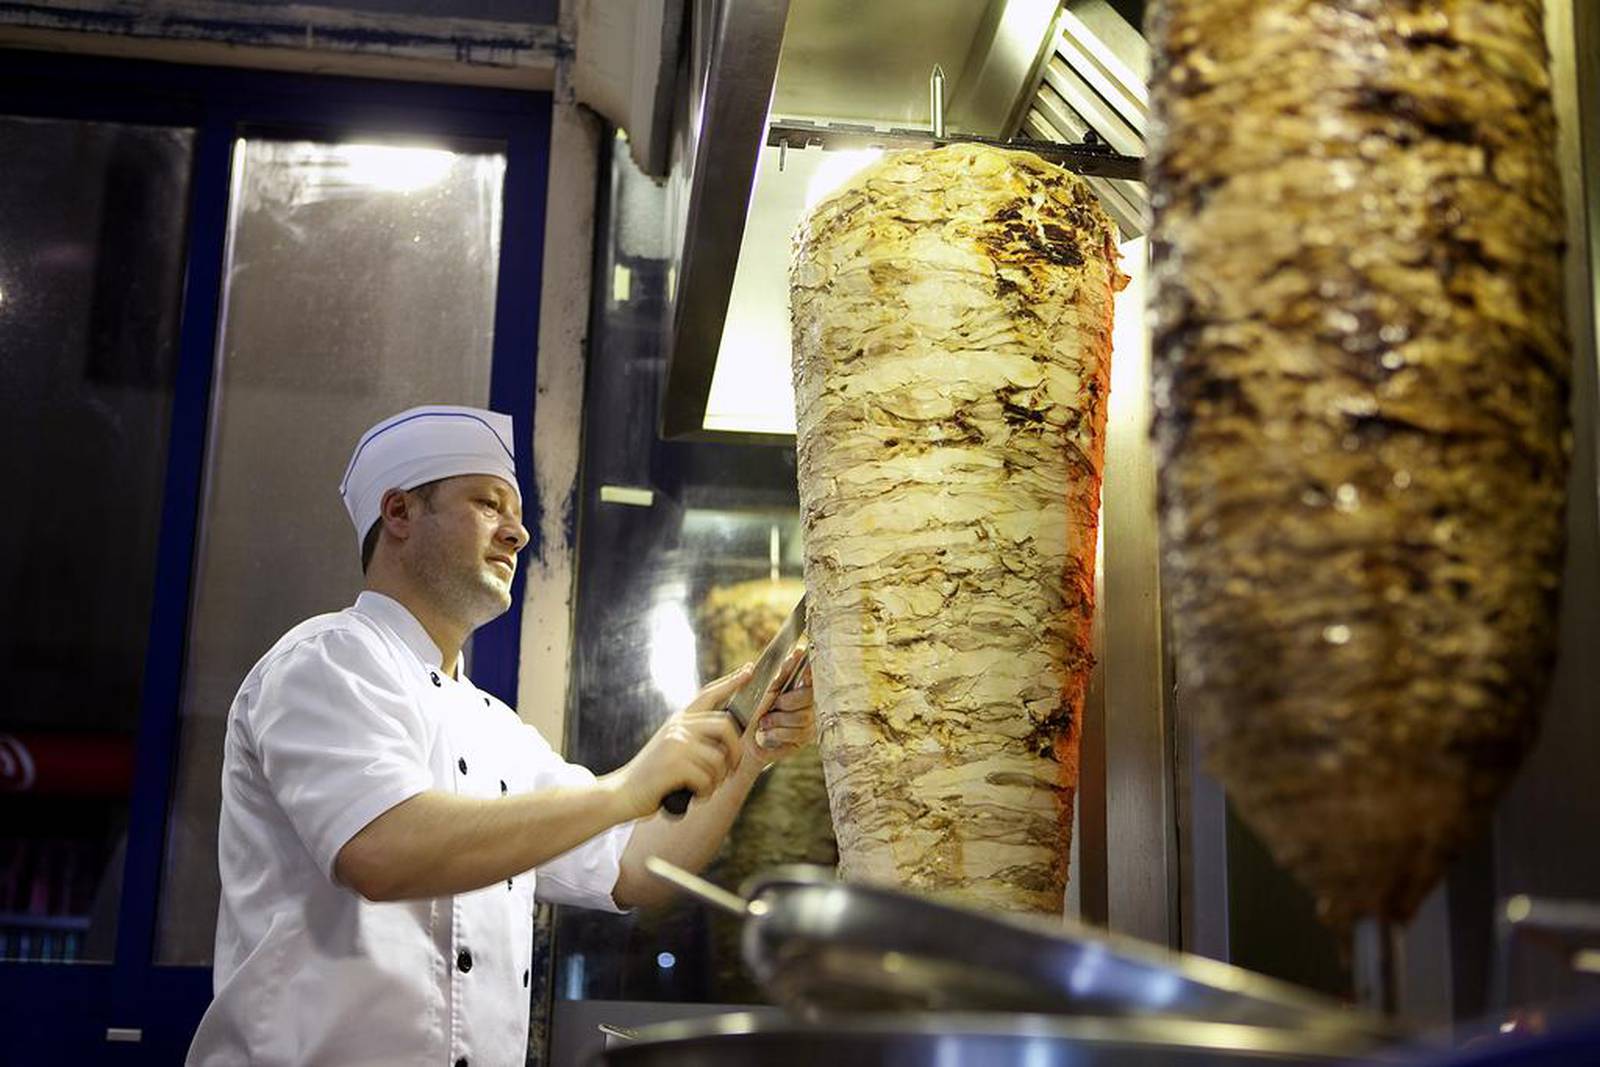 No issues with shawarma